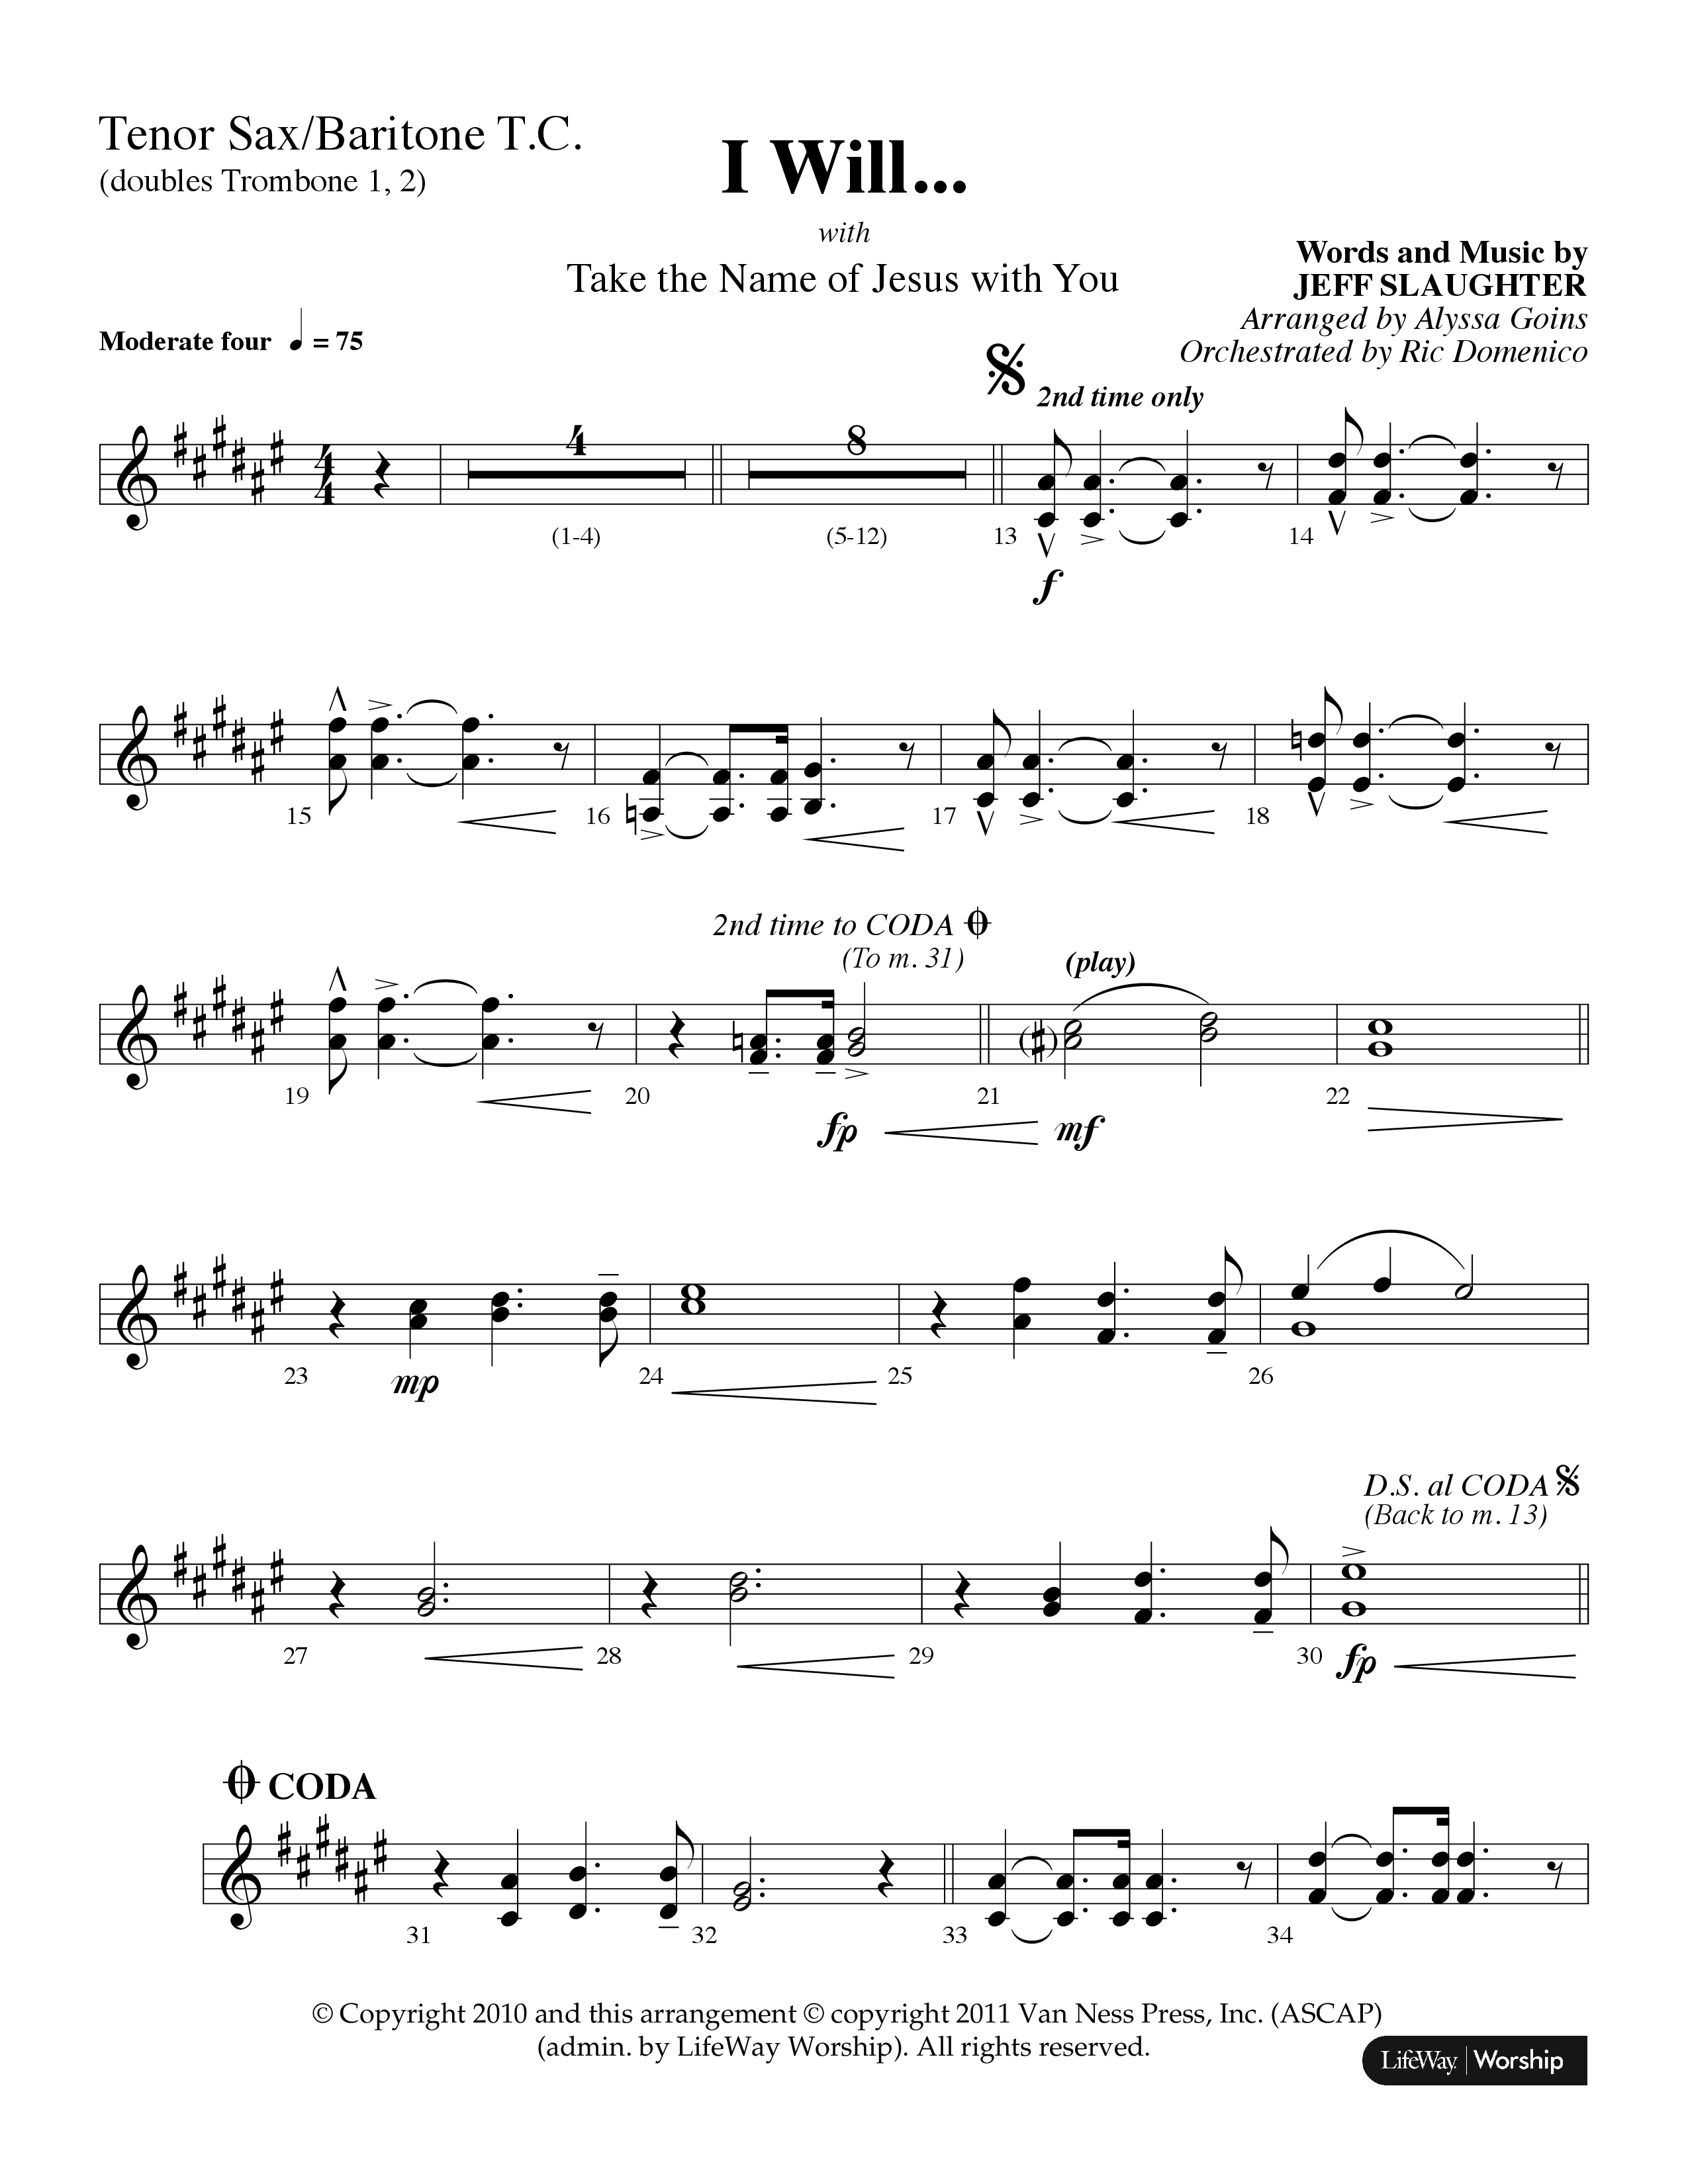 I Will (with Take The Name Of Jesus With You) (Choral Anthem SATB) Tenor Sax/Baritone T.C. (Lifeway Choral / Arr. Alyssa Goins / Orch. Ric Domenico)